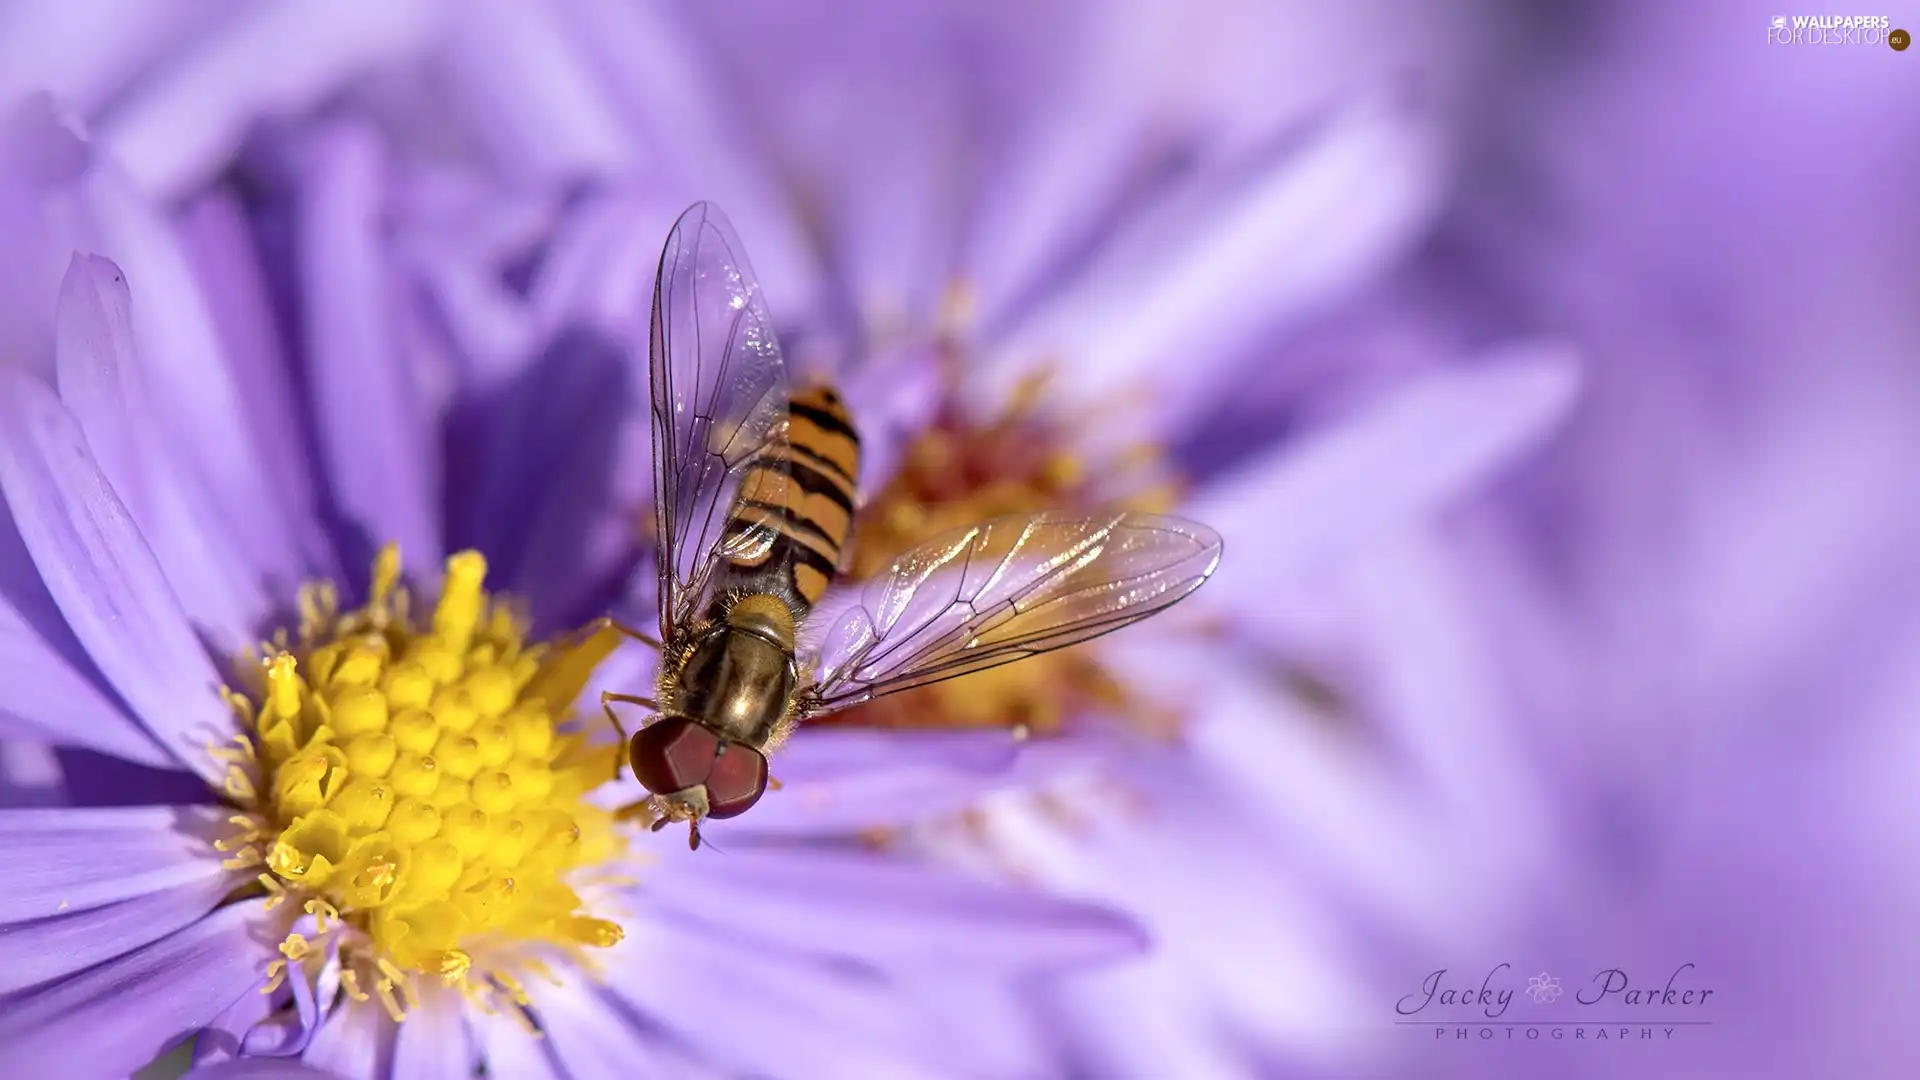 rods, Colourfull Flowers, Marmalade Hoverfly, Yellow, Violet, Insect, Close